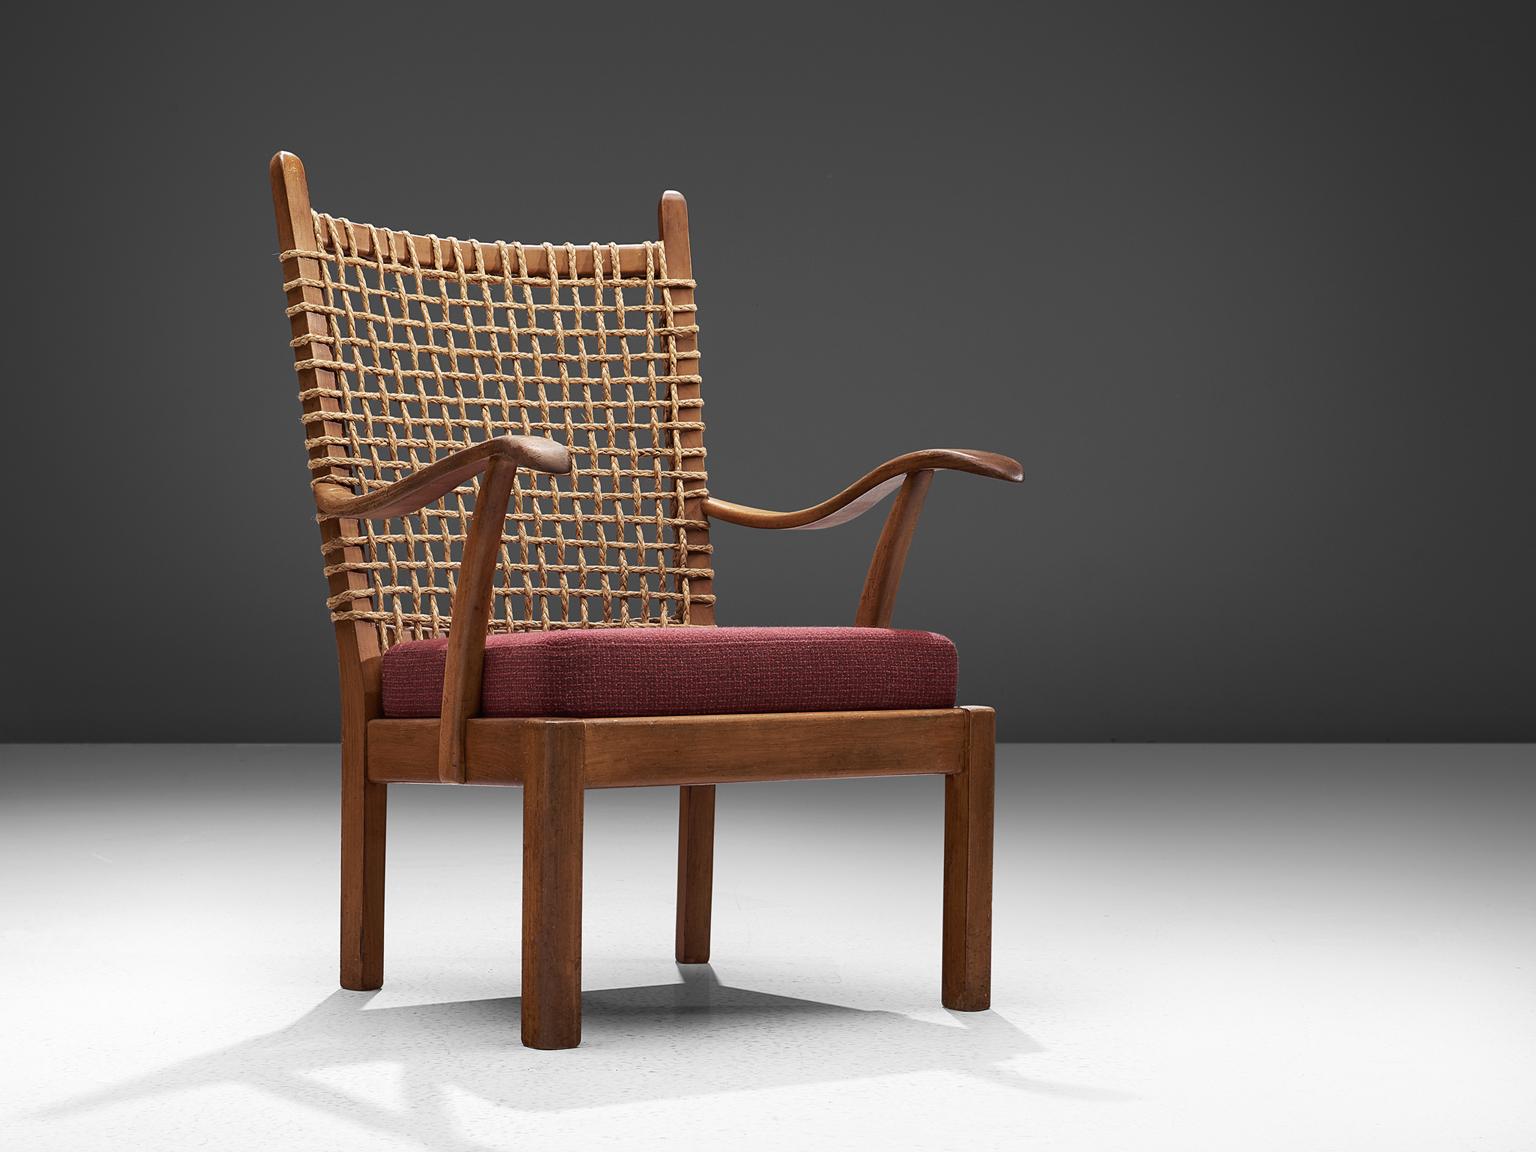 Dutch armchair, oak and cane, the Netherlands, 1940s.

This robust Dutch chair originates from the late 1940s and is very reminiscent of armchairs designed by Bas van Pelt. The seat is make of oak and back is made of woven cane.. This natural,